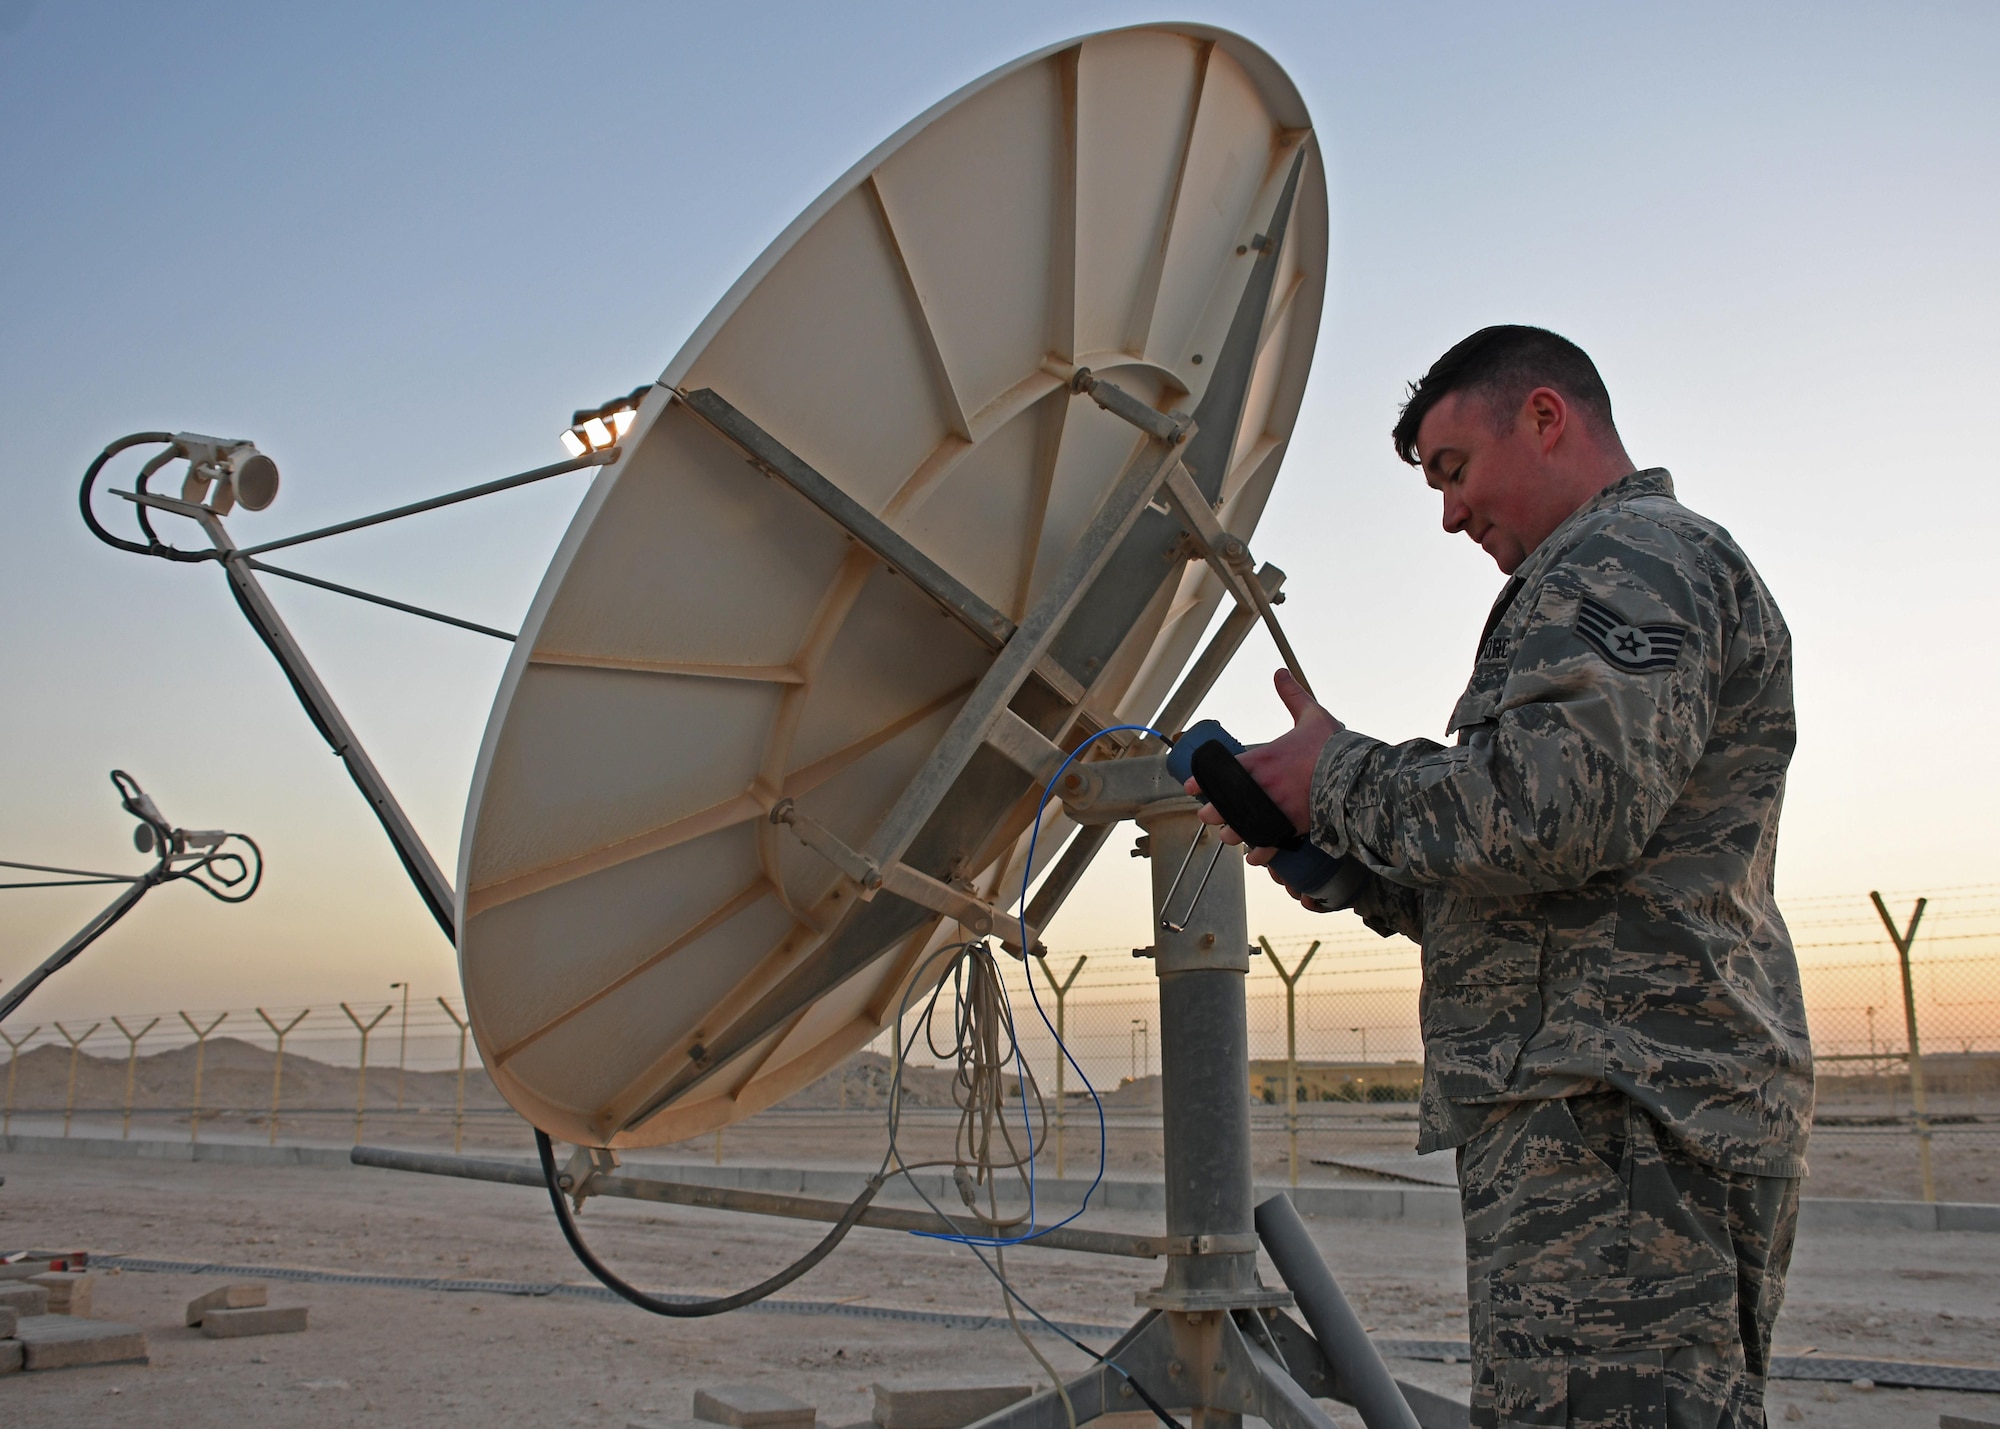 U.S. Air Force Staff Sgt. Chris Hayes, a Bounty Hunter crew chief with the 379th Expeditionary Operations Support Squadron, uses a control to locate a satellite in space at Al Udeid Air Base, Qatar, Jan. 30, 2017. Hayes supports Operation Silent Sentry, which provides defensive space capabilities for the U.S. Central Command area of responsibility. (U.S. Air Force photo by Senior Airman Miles Wilson)